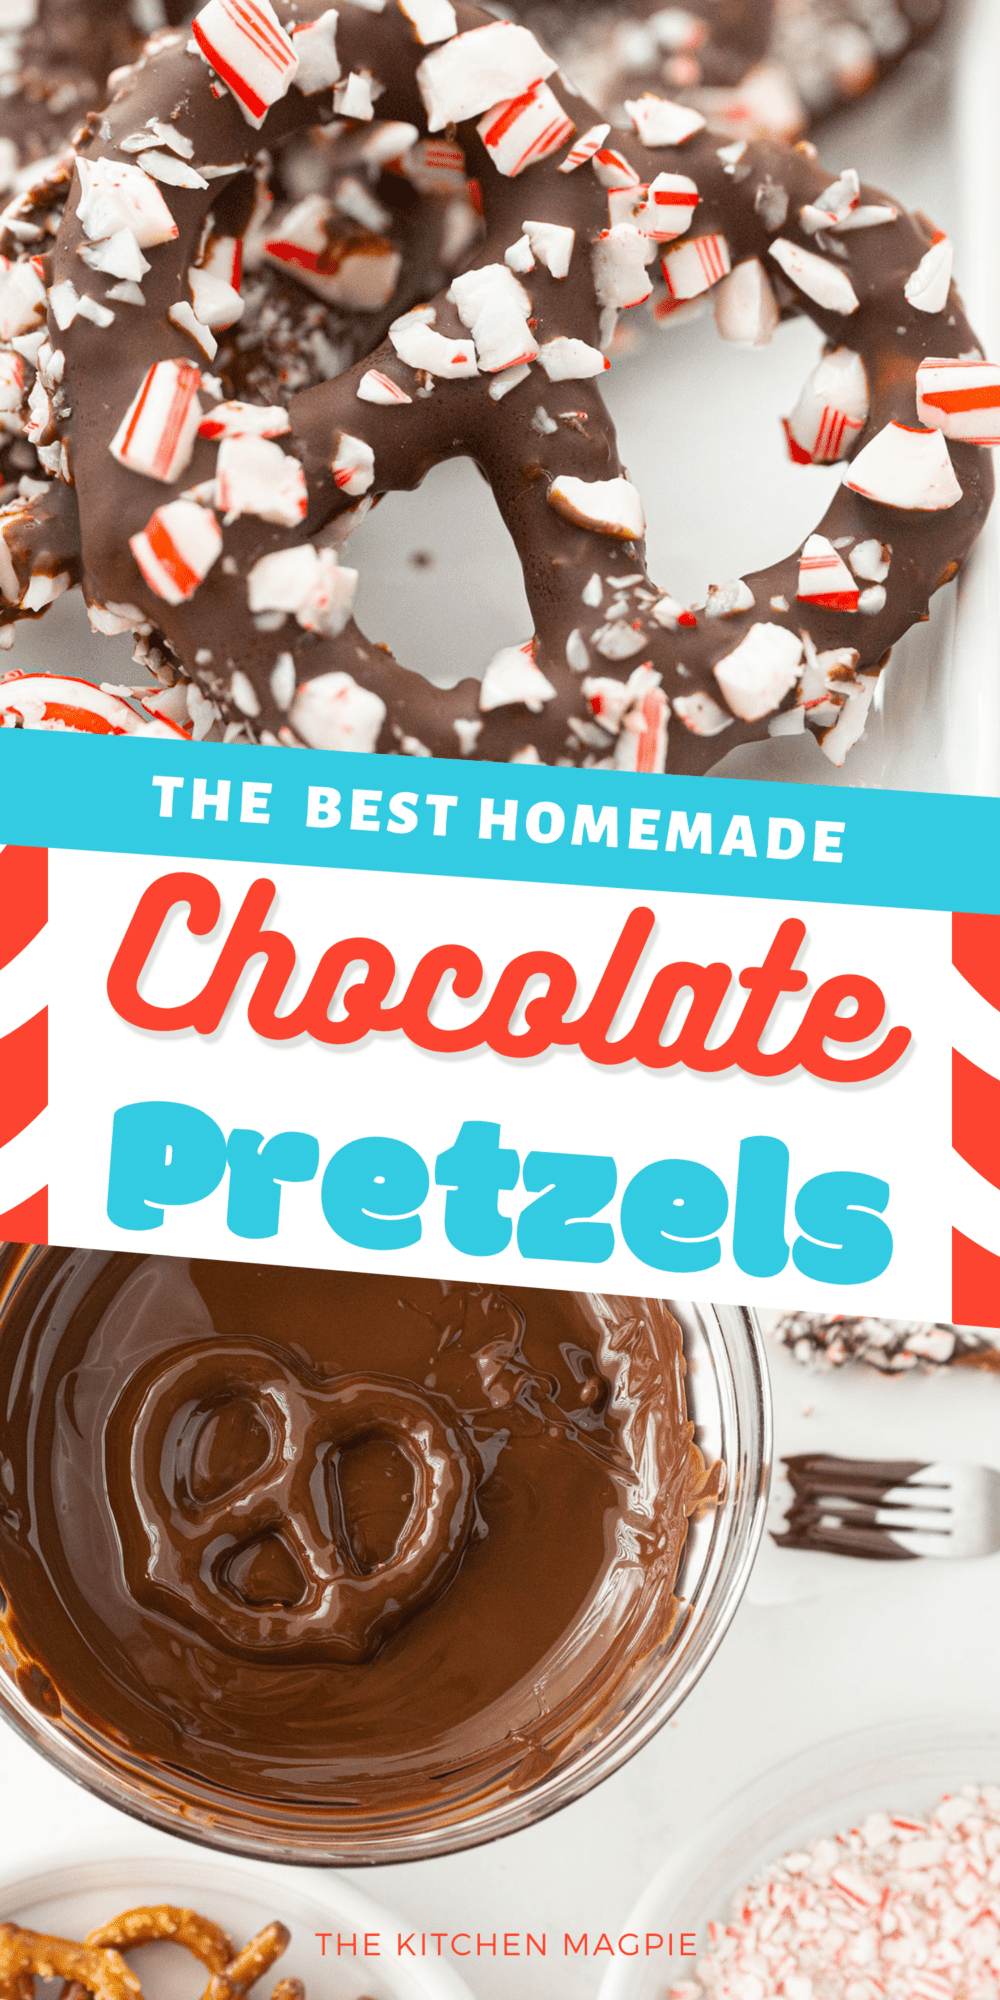 How to make chocolate covered pretzels at home! Use the chocolate and topping of your choice, along with your favorite shape of pretzel for a delicious salty, sweet snack!